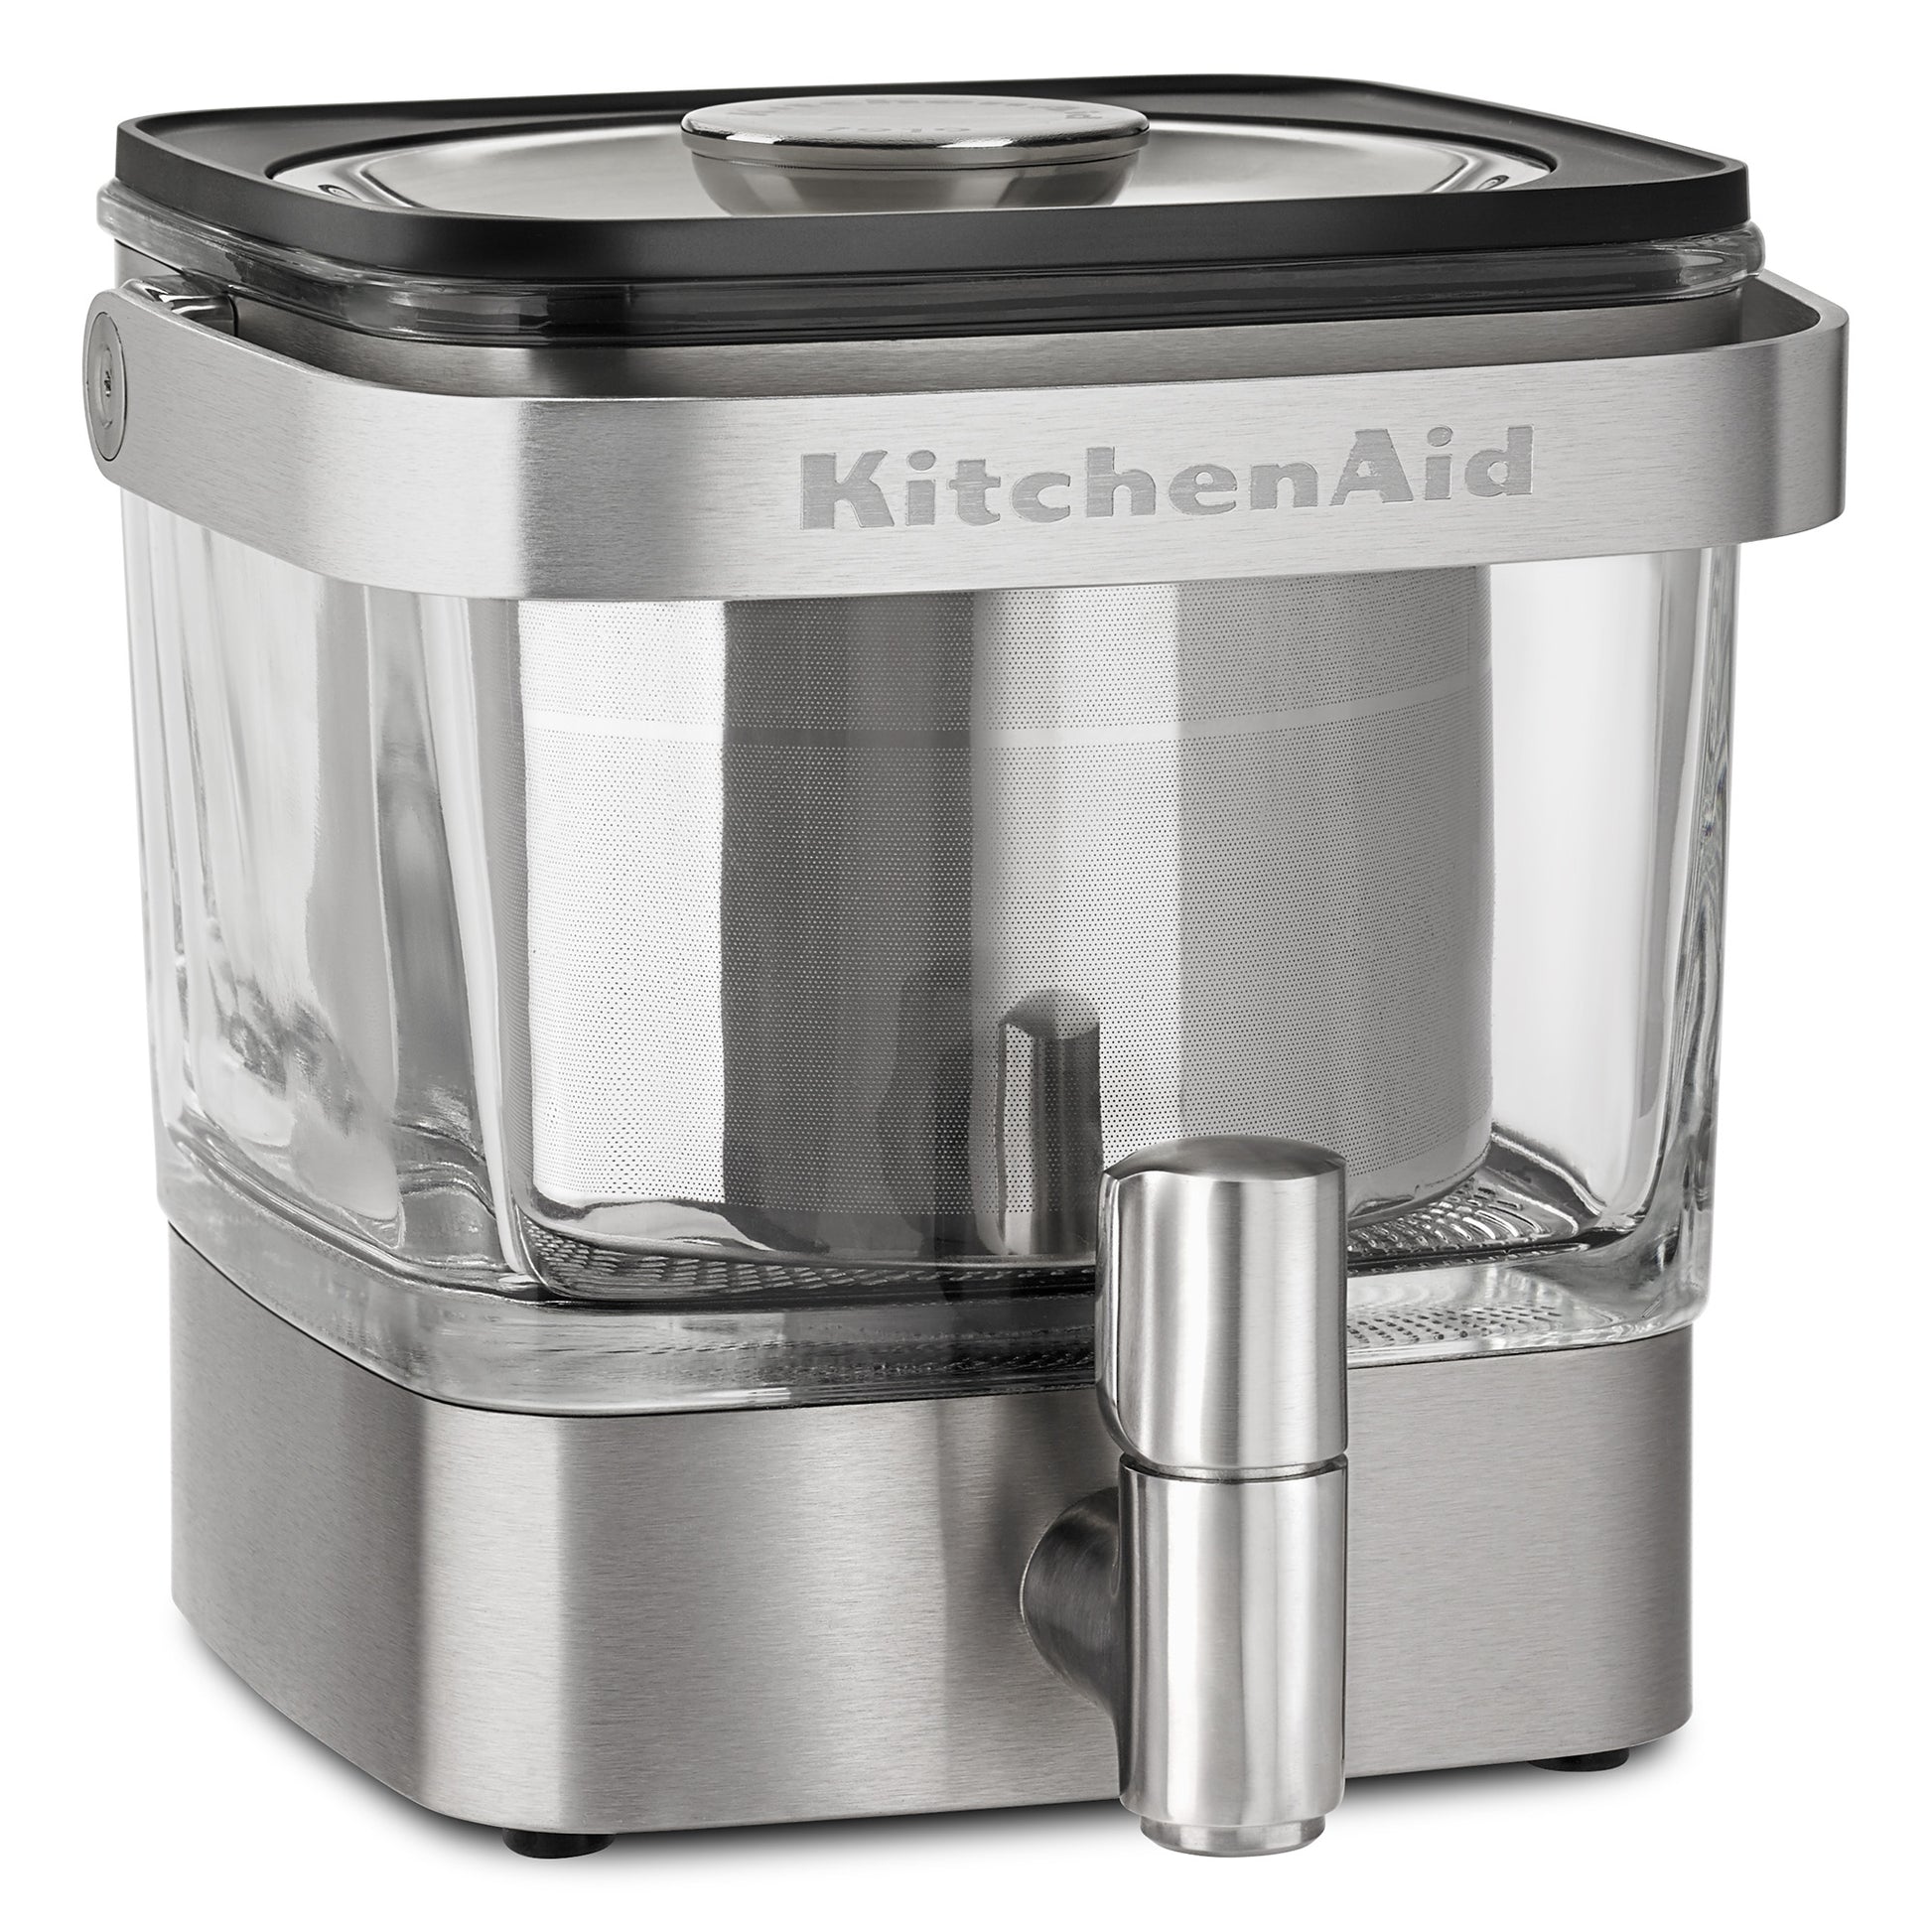 KitchenAid KCM4212SX Cold Brew Coffee Maker, Brushed Stainless Steel